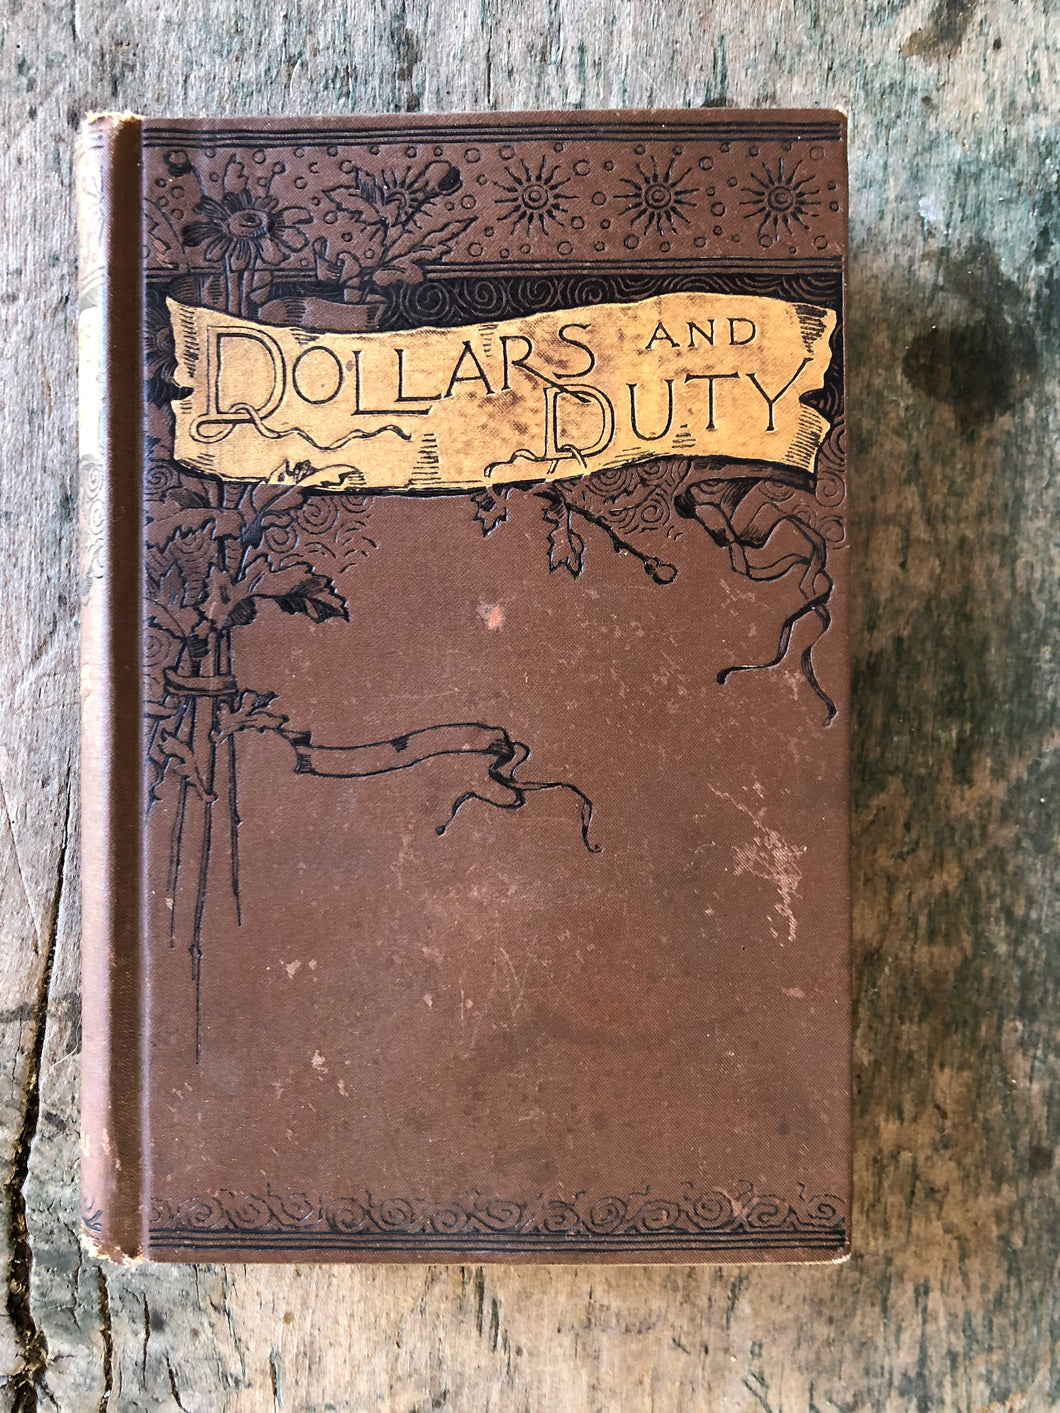 Dollars and Duty. by Emory J. Haynes